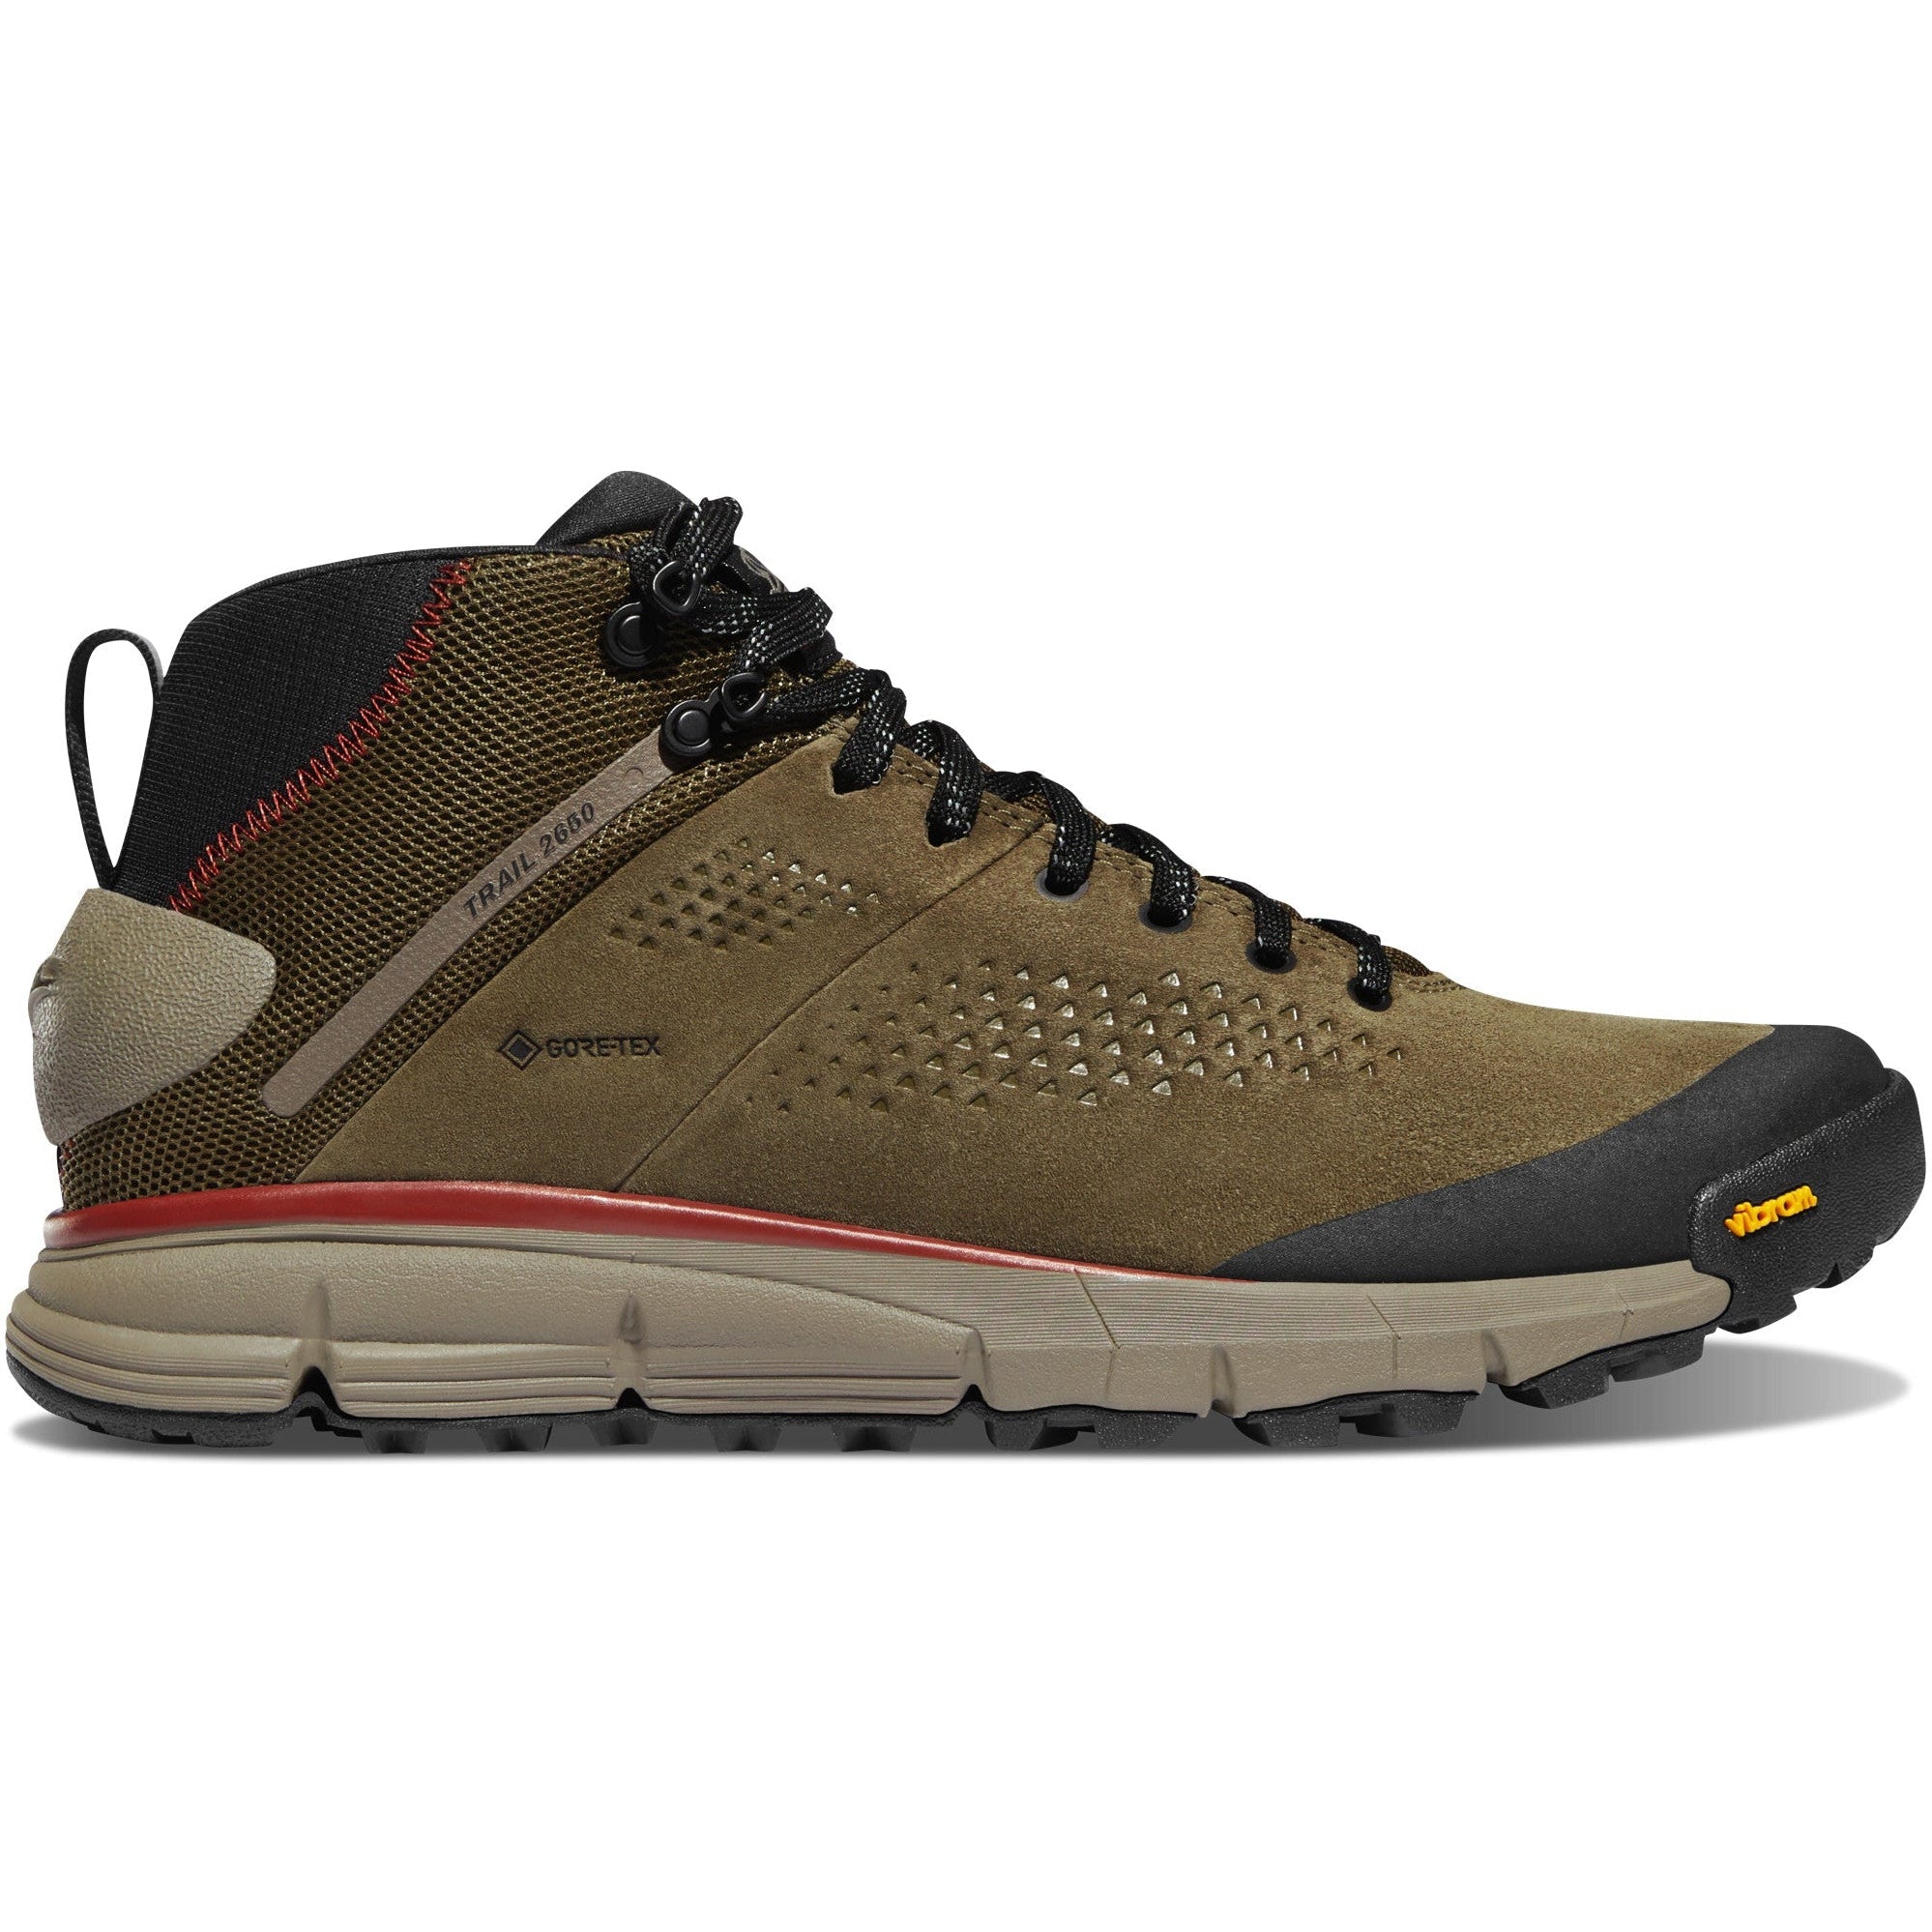 Danner Men's Trail 2650 GTX Mid 4" WP Hiking Shoe - Olive - 61240  - Overlook Boots